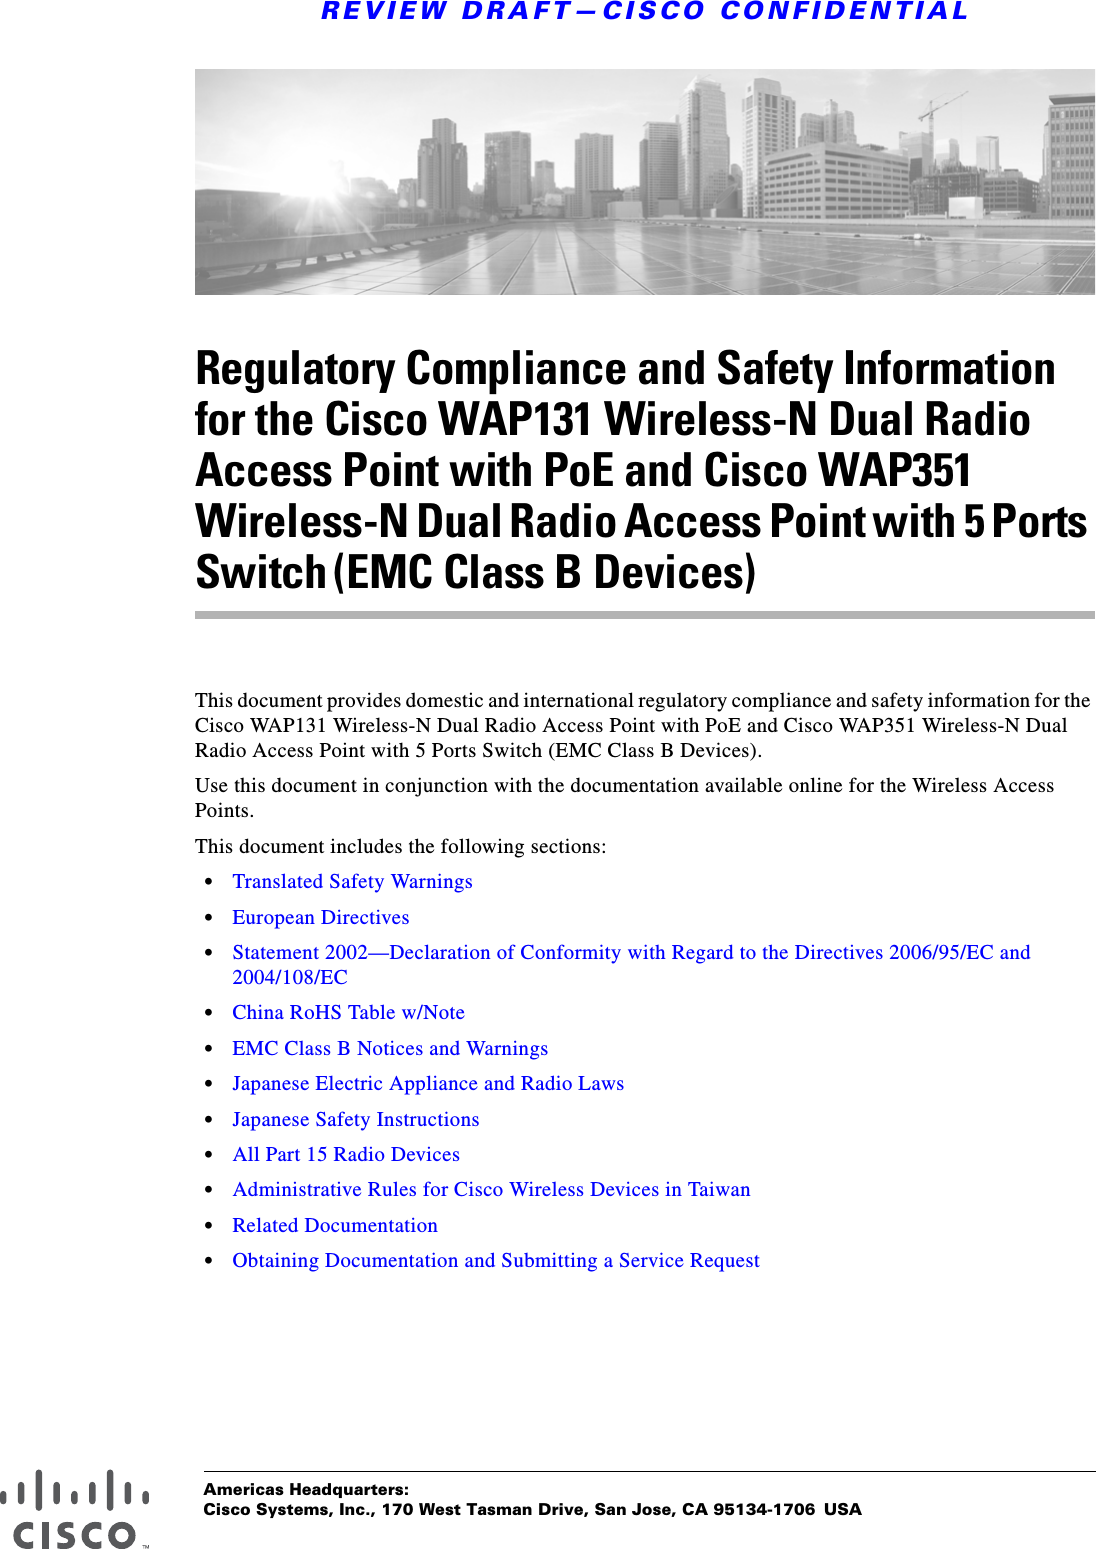 Americas Headquarters:Cisco Systems, Inc., 170 West Tasman Drive, San Jose, CA 95134-1706 USAREVIEW DRAFT—CISCO CONFIDENTIALRegulatory Compliance and Safety Information for the Cisco WAP131 Wireless-N Dual Radio Access Point with PoE and Cisco WAP351 Wireless-N Dual Radio Access Point with 5 Ports Switch (EMC Class B Devices)This document provides domestic and international regulatory compliance and safety information for the Cisco WAP131 Wireless-N Dual Radio Access Point with PoE and Cisco WAP351 Wireless-N Dual Radio Access Point with 5 Ports Switch (EMC Class B Devices).Use this document in conjunction with the documentation available online for the Wireless Access Points.This document includes the following sections:•Translated Safety Warnings•European Directives•Statement 2002—Declaration of Conformity with Regard to the Directives 2006/95/EC and 2004/108/EC•China RoHS Table w/Note•EMC Class B Notices and Warnings•Japanese Electric Appliance and Radio Laws•Japanese Safety Instructions•All Part 15 Radio Devices•Administrative Rules for Cisco Wireless Devices in Taiwan•Related Documentation•Obtaining Documentation and Submitting a Service Request